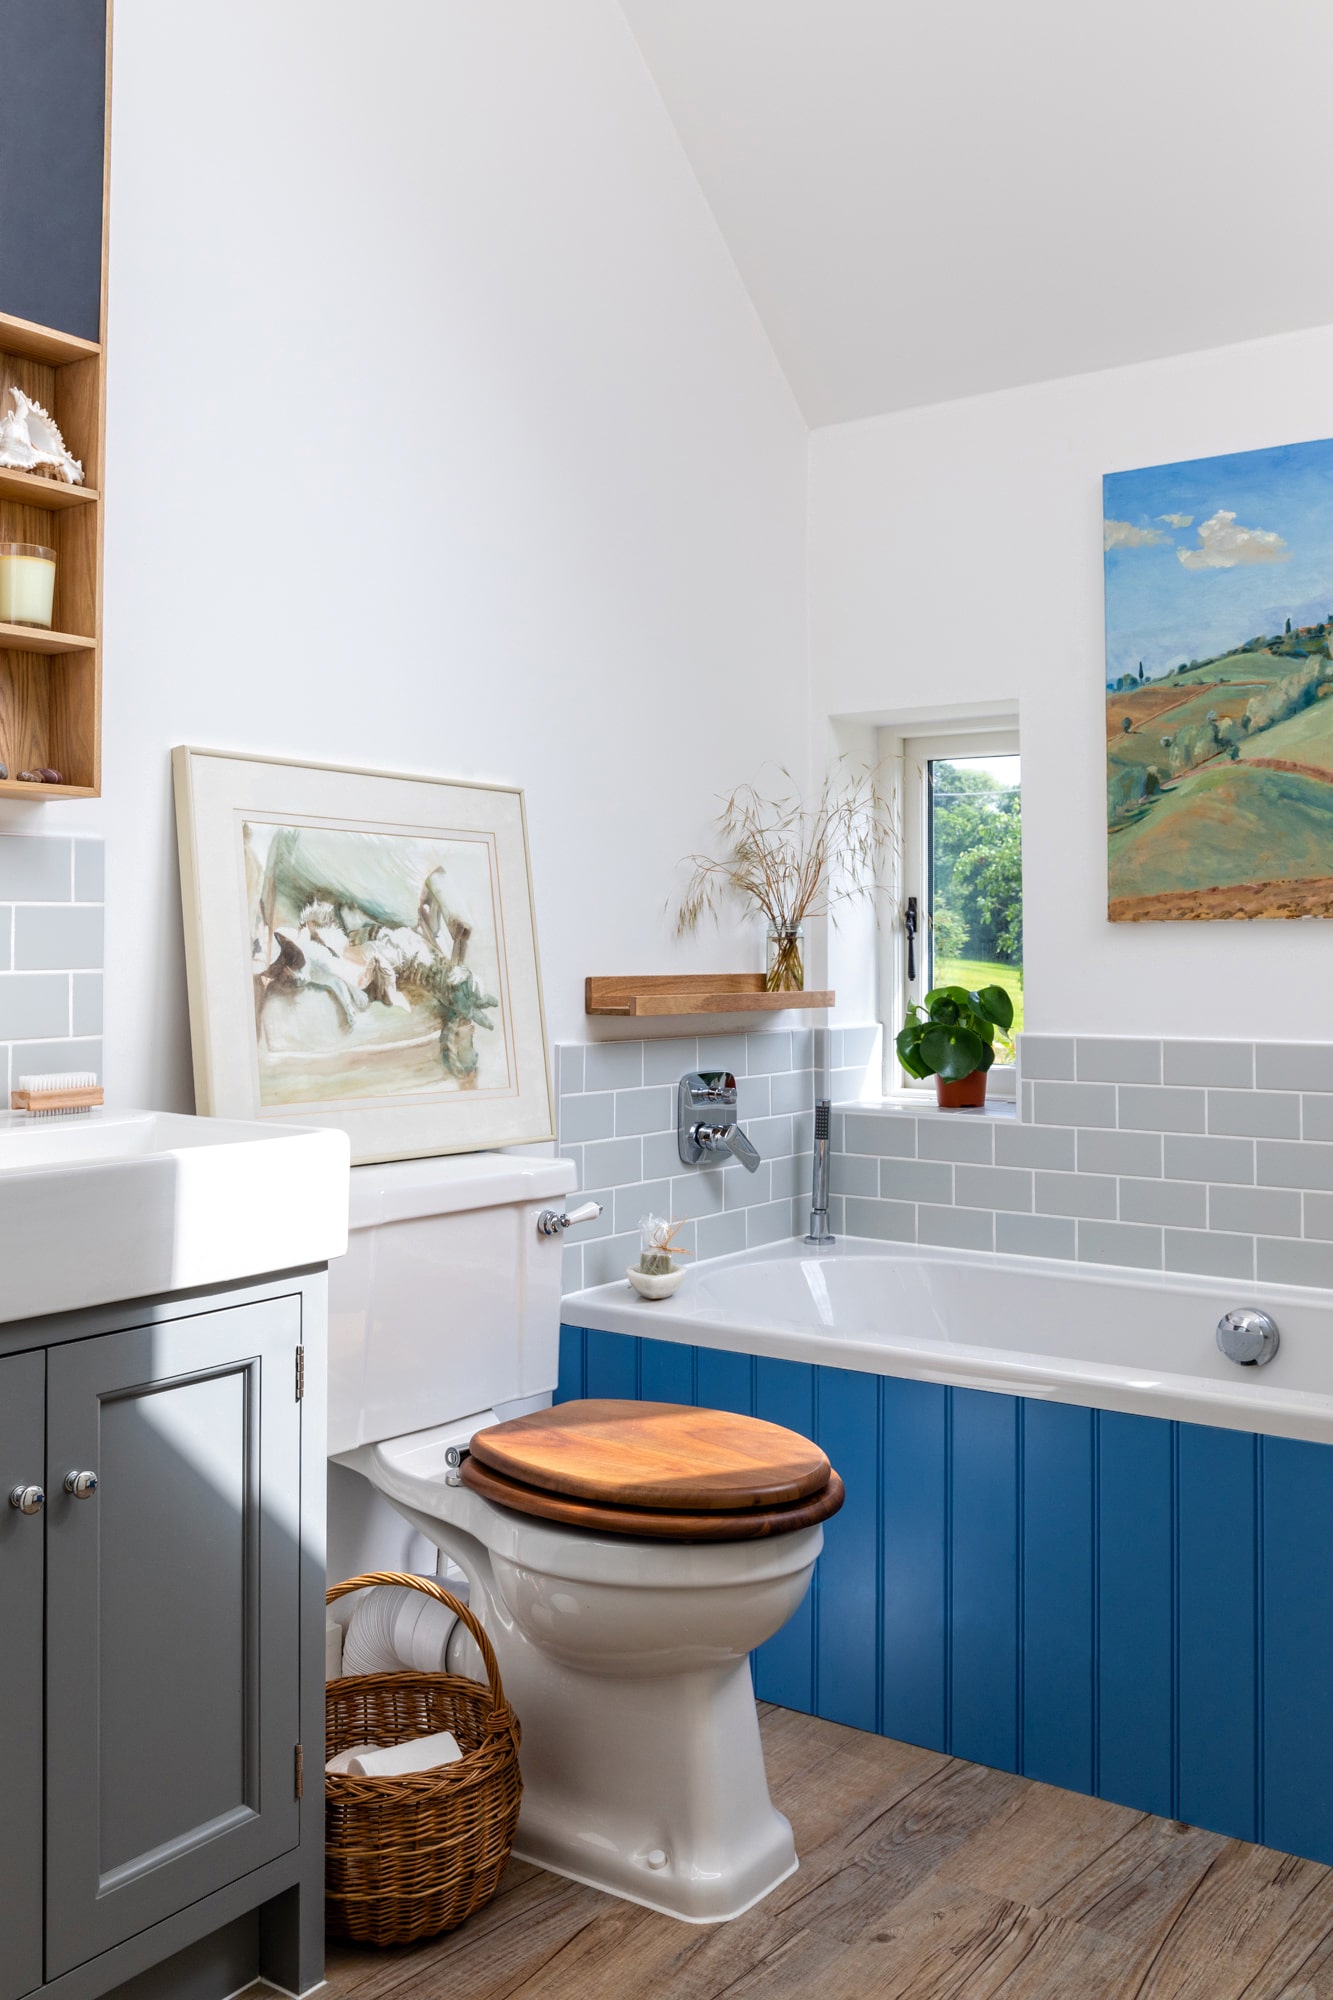 Interior design photography: bathroom in a country house with blue paneling on a bathtub, landscape art on the wall